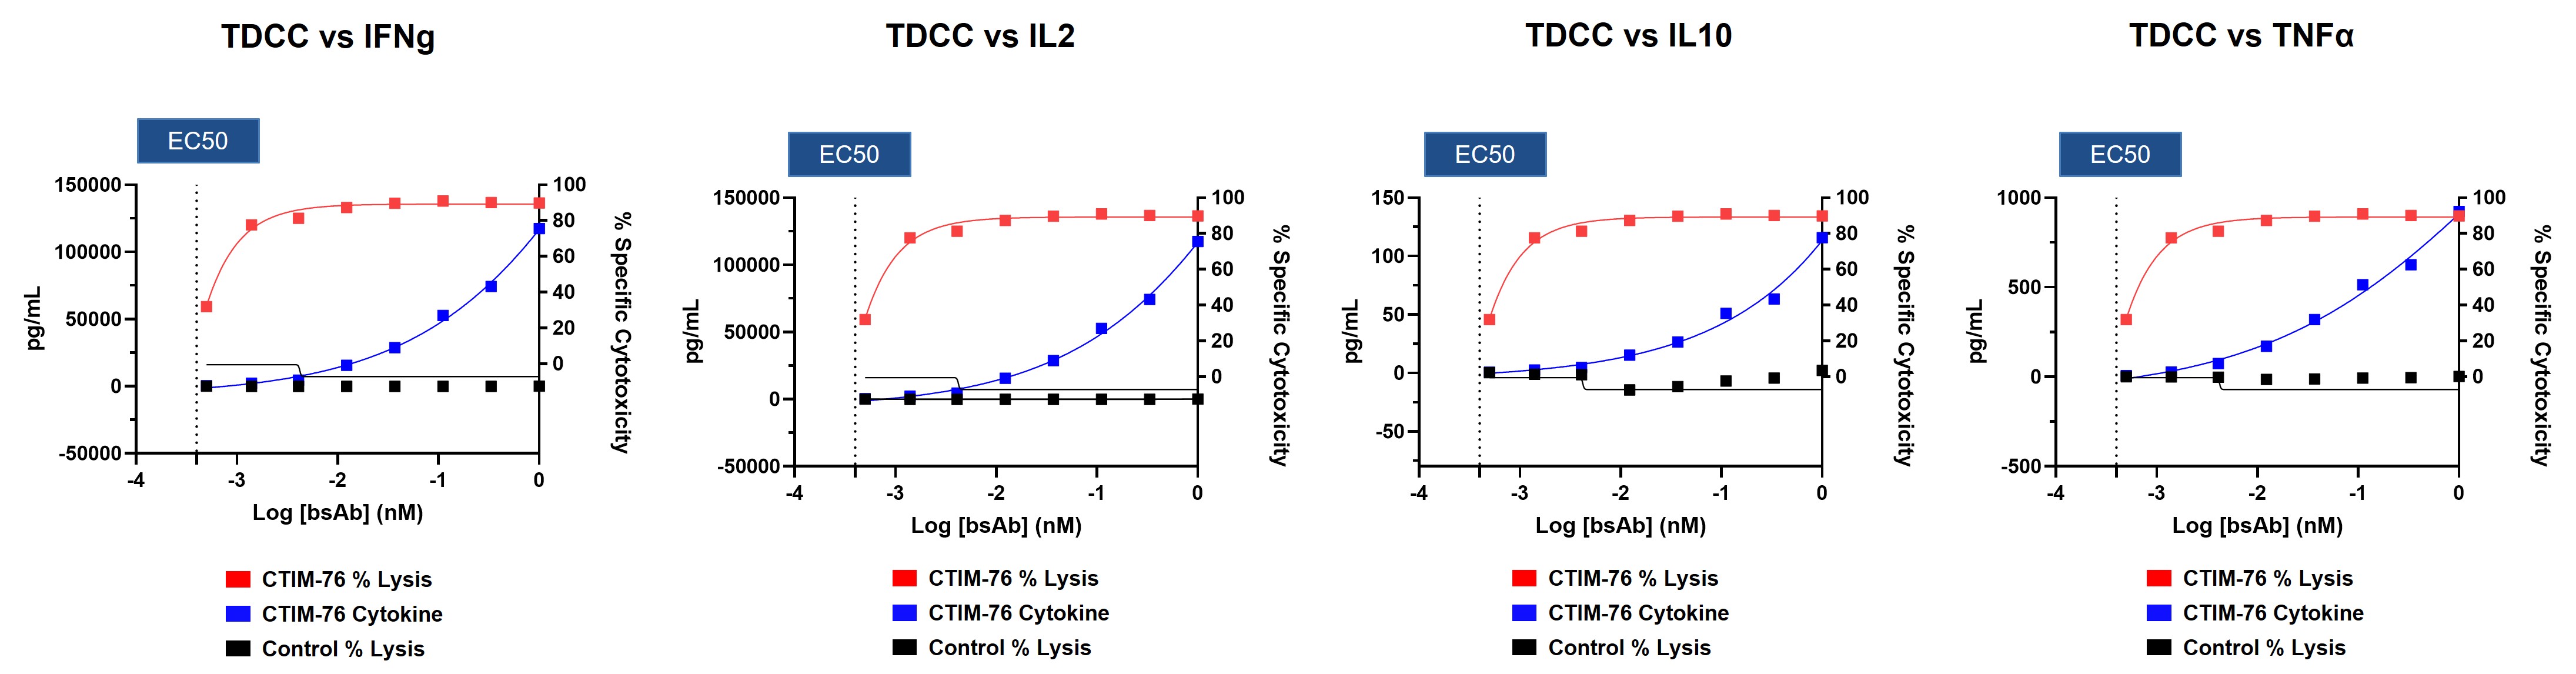 Image 1 - Comparison of T cell.jpg